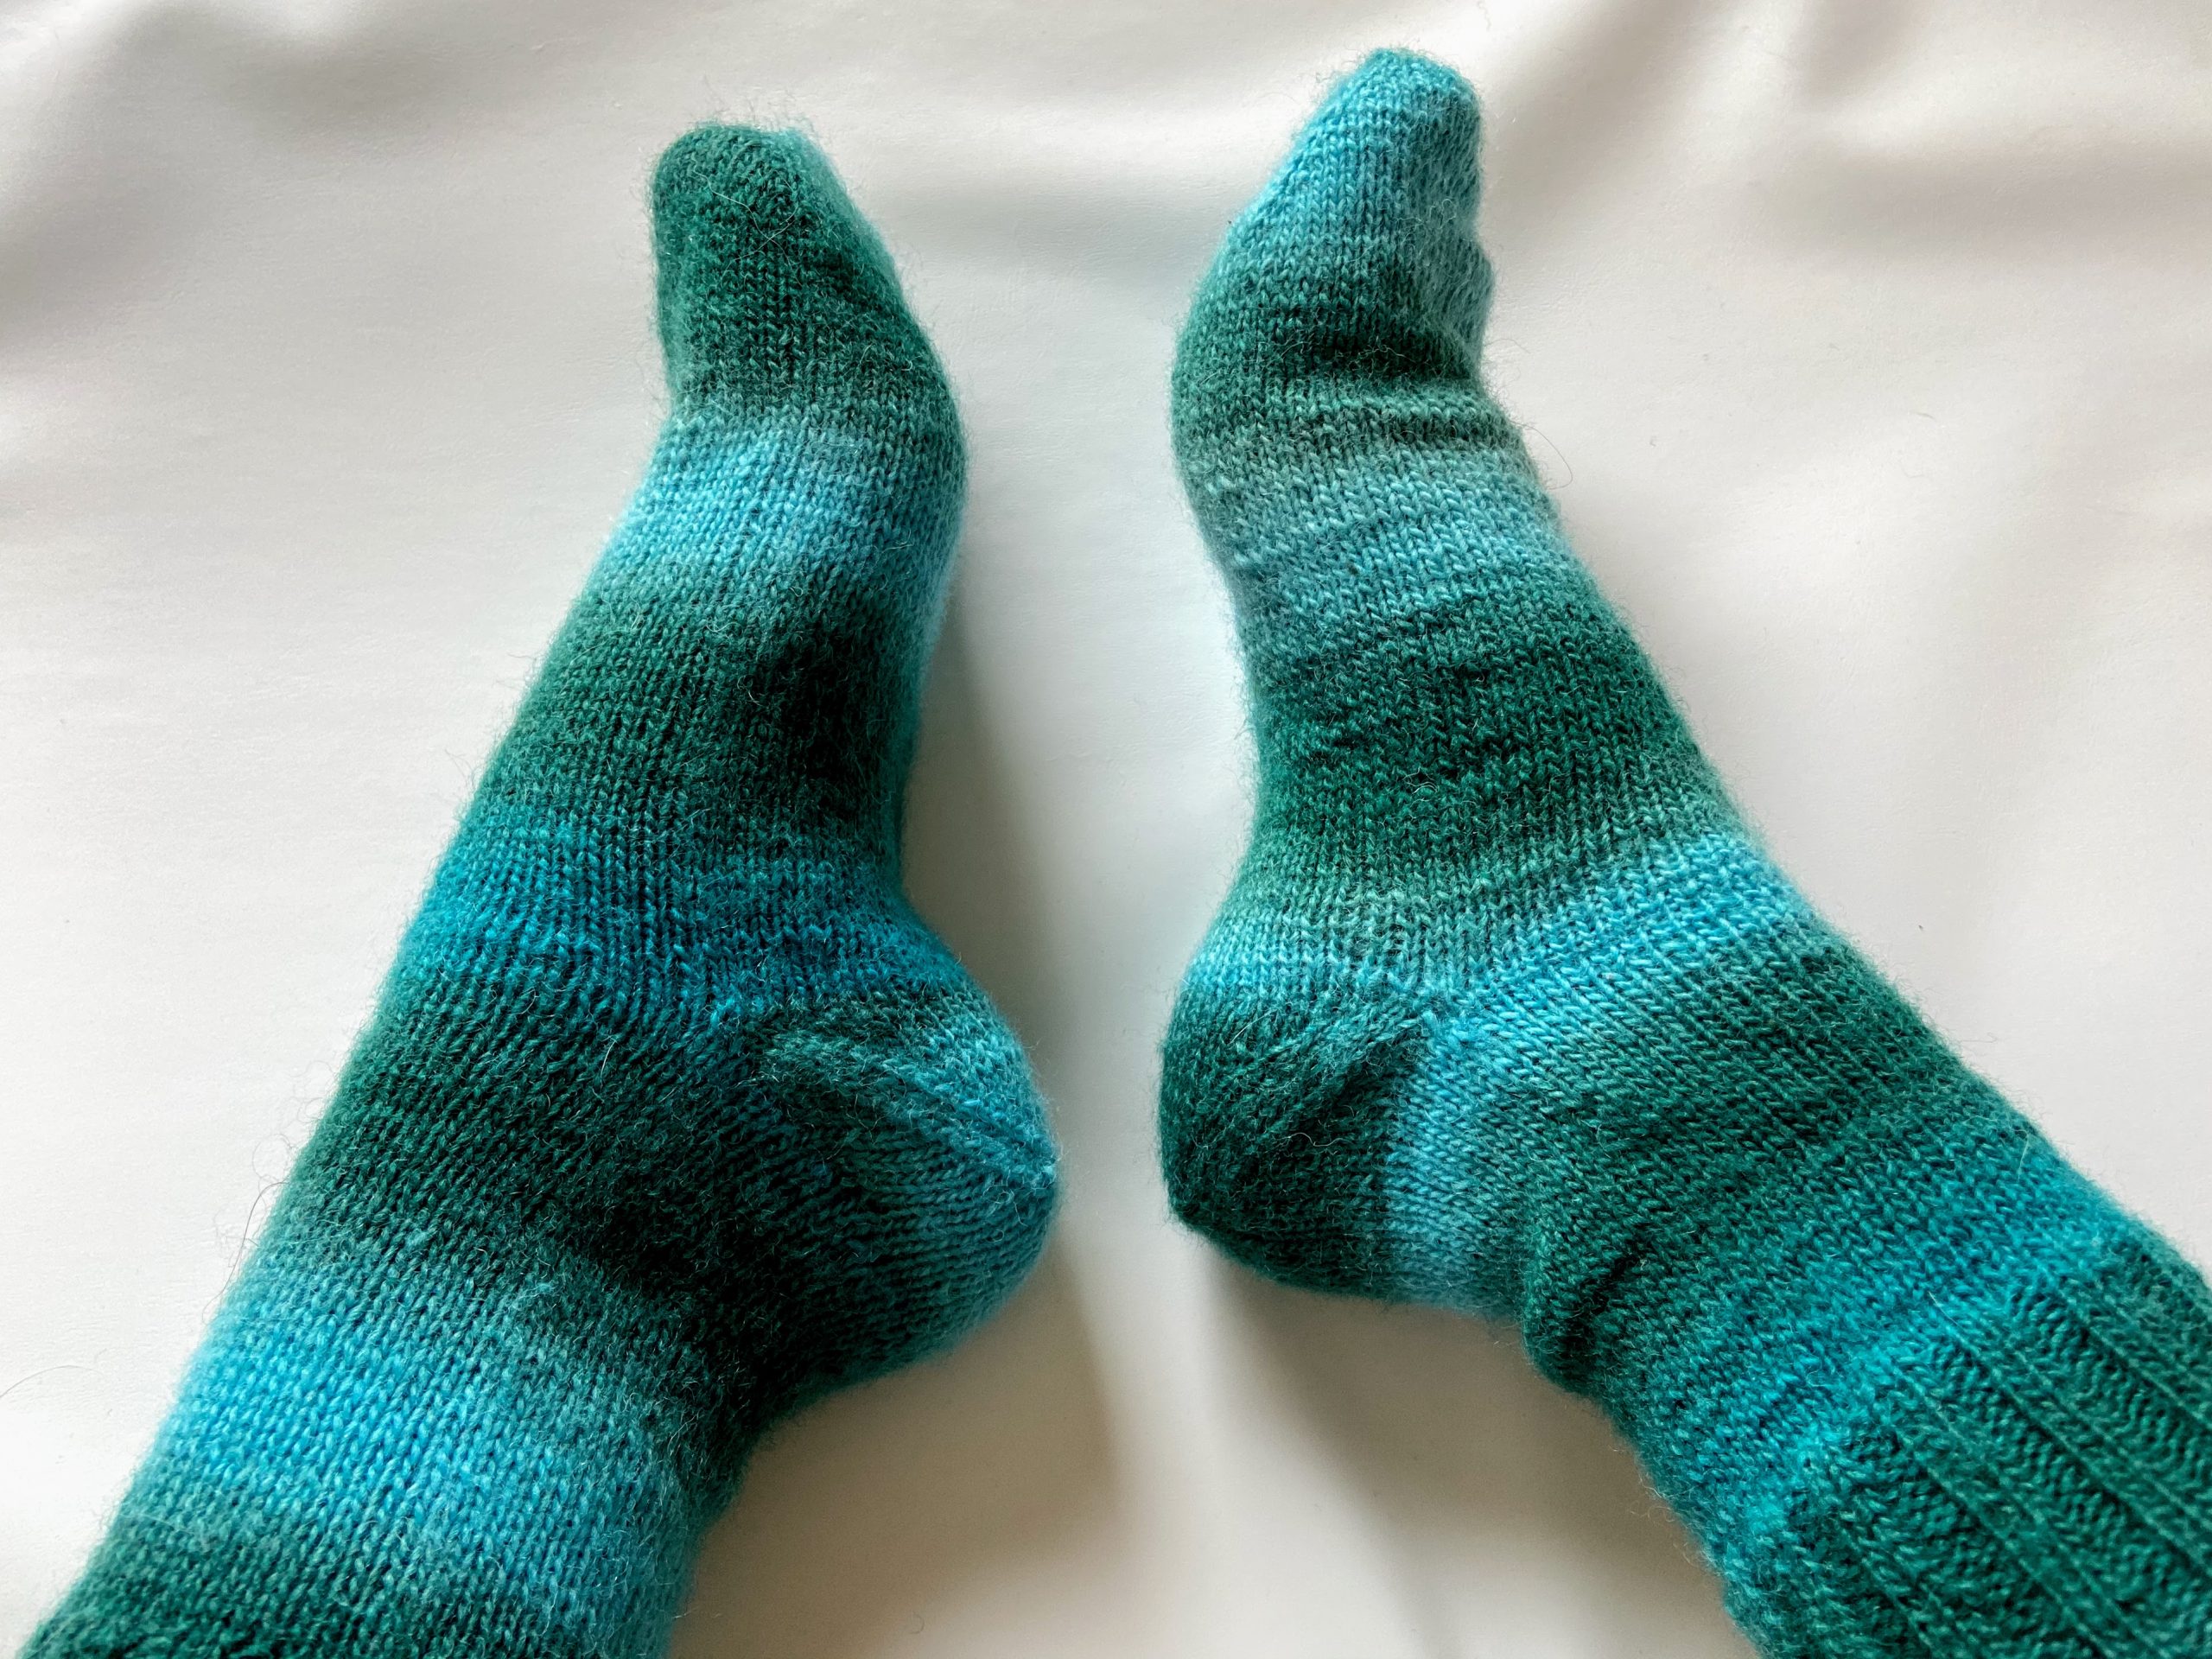 Pair of vanilla socks with afterthought heel